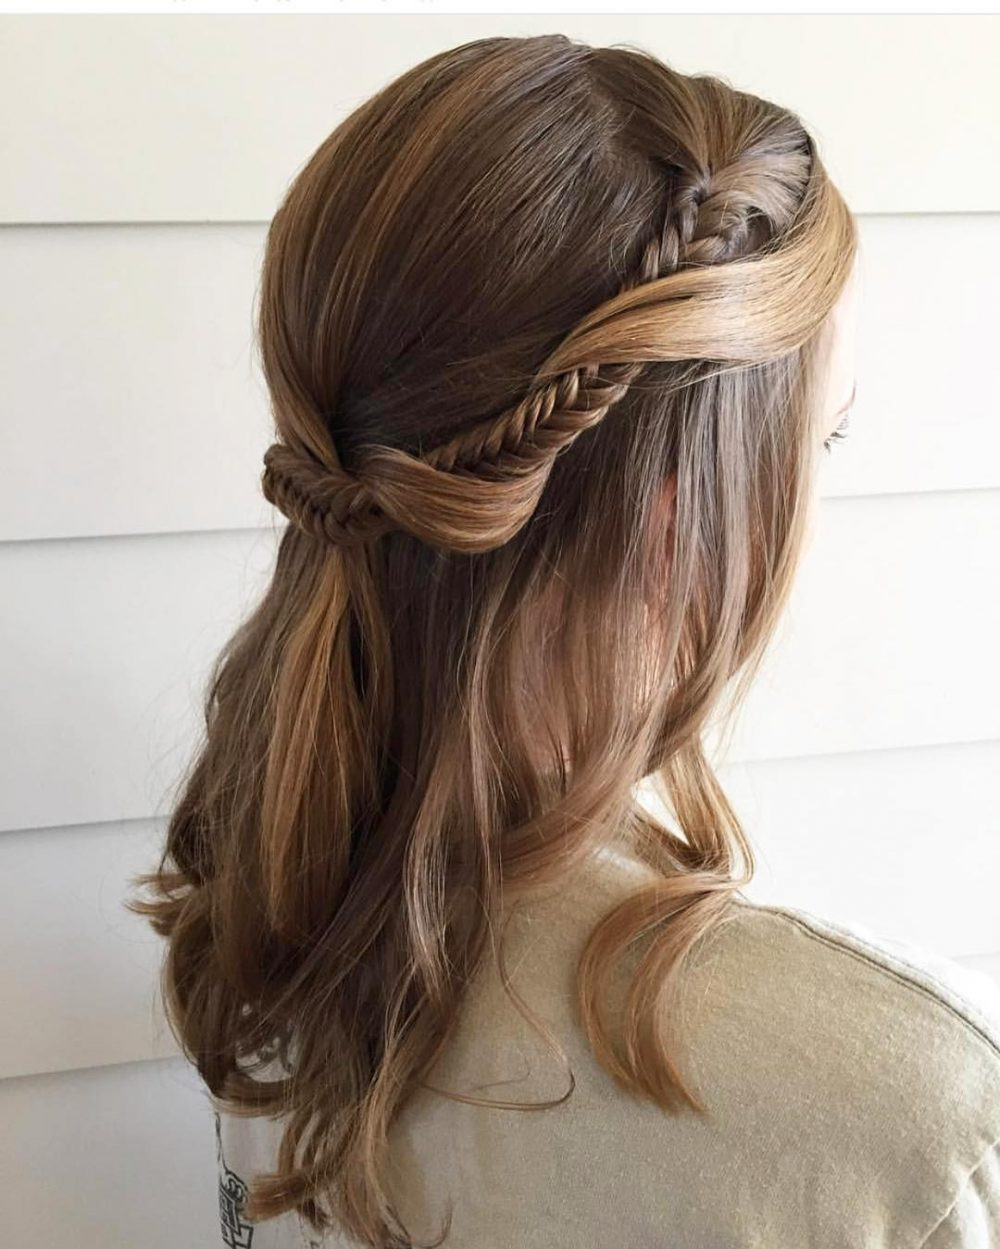 Easy Prom Hairstyles Updos
 21 Super Easy Updos Anyone Can Do Trending in 2019